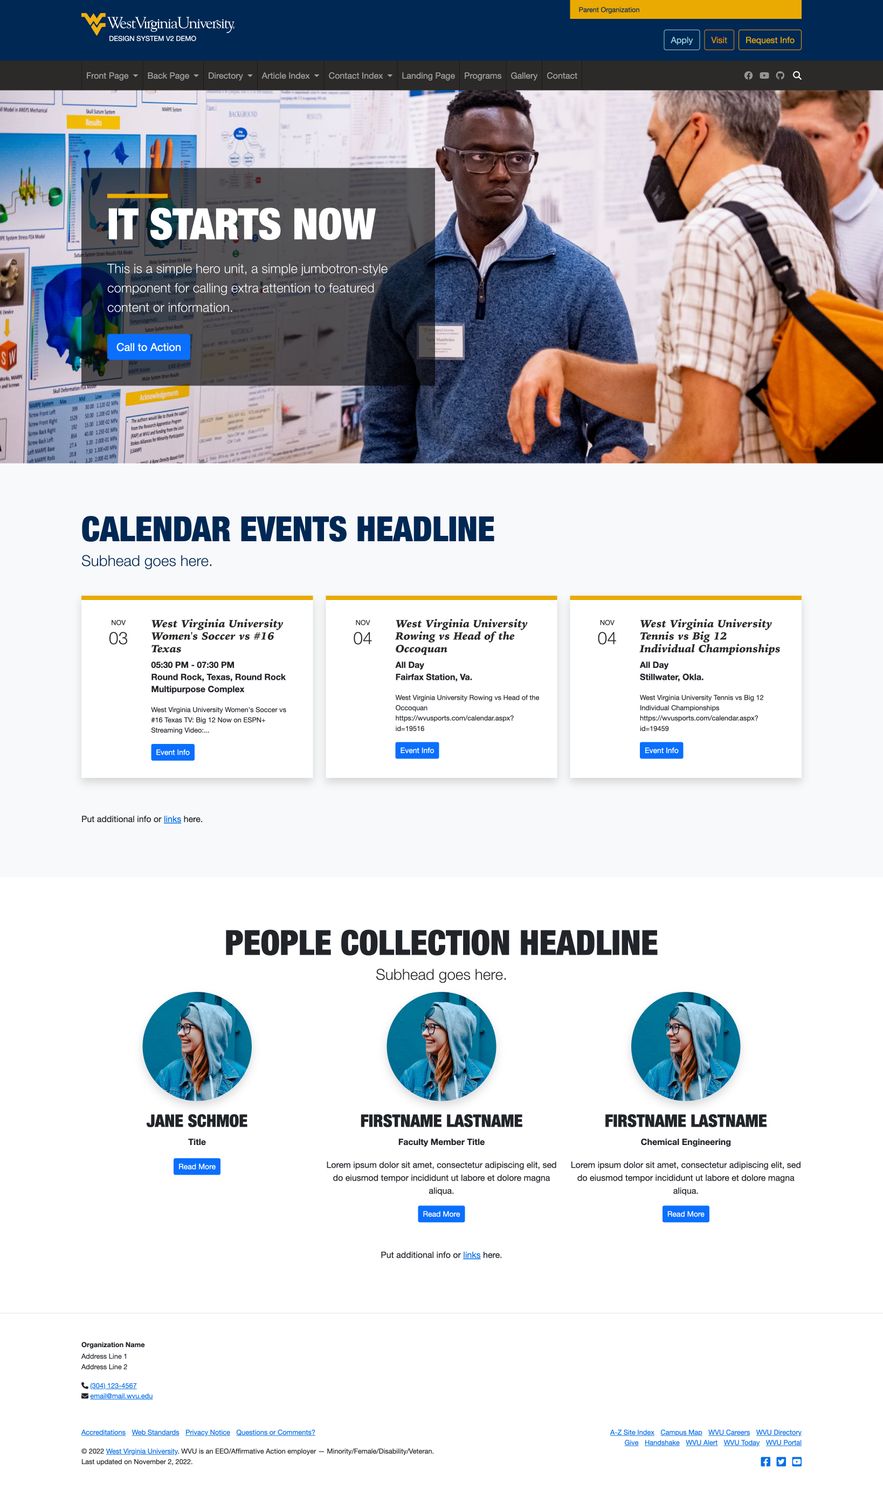 Frontpage - Conference or Event screenshot